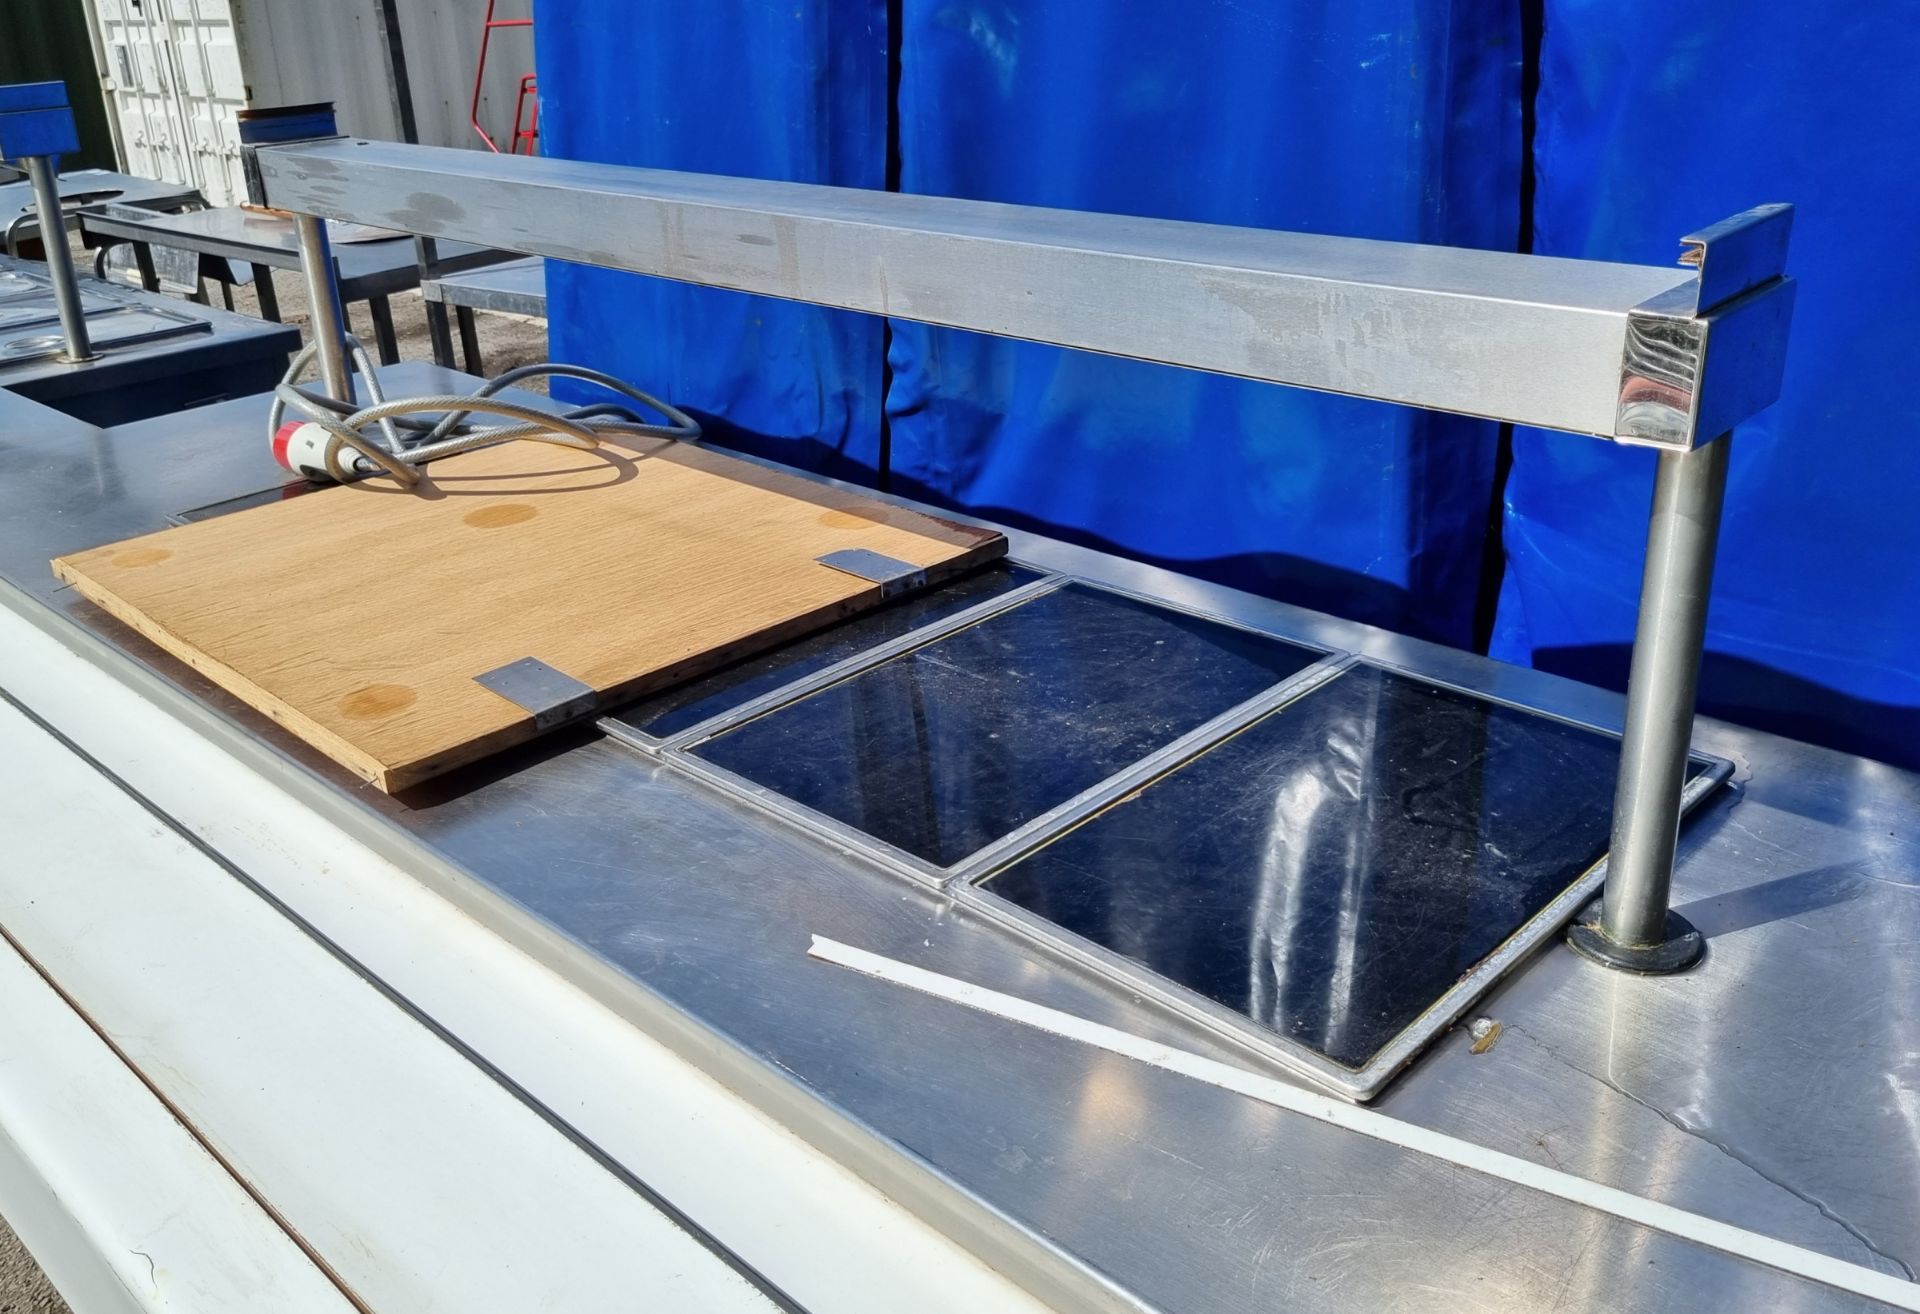 Portable hot cupboard with bain marie unit and tray slide - W 2860 x D 1160 x H 1370 mm - Image 3 of 5